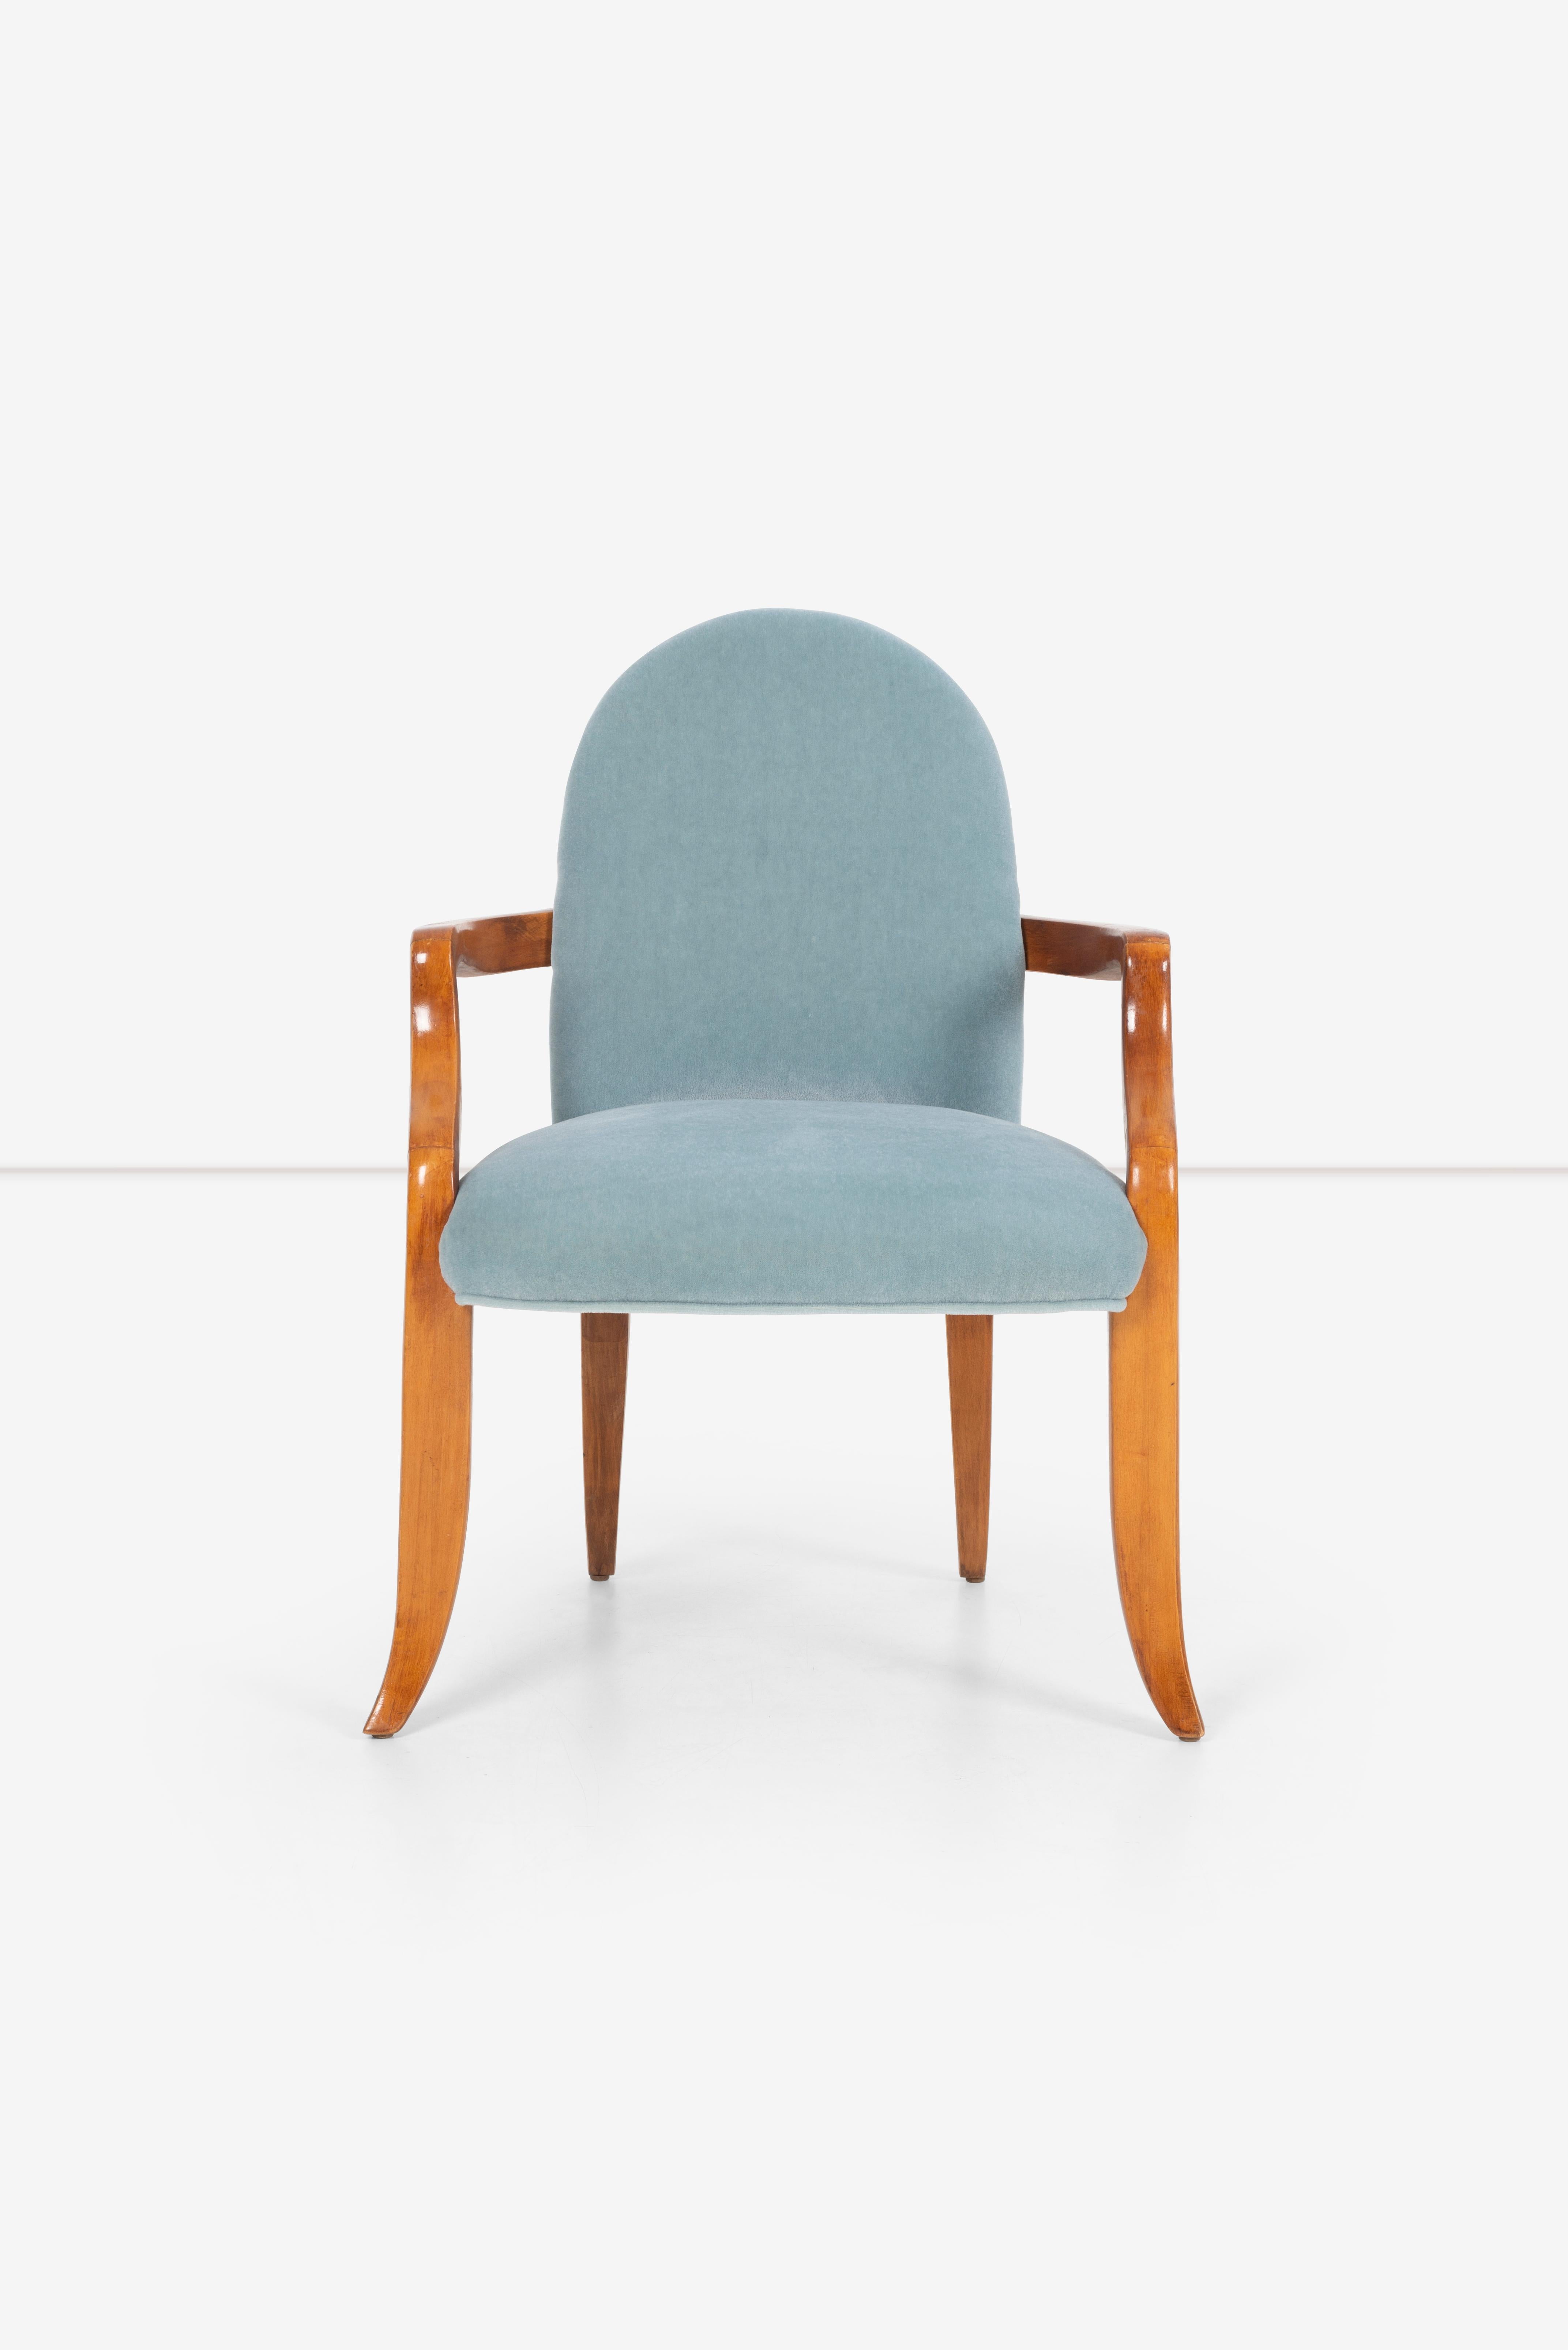 Wendell castle accent or desk chair. Upholstered in a sky-blue mohair. Sculptural and carved lines.